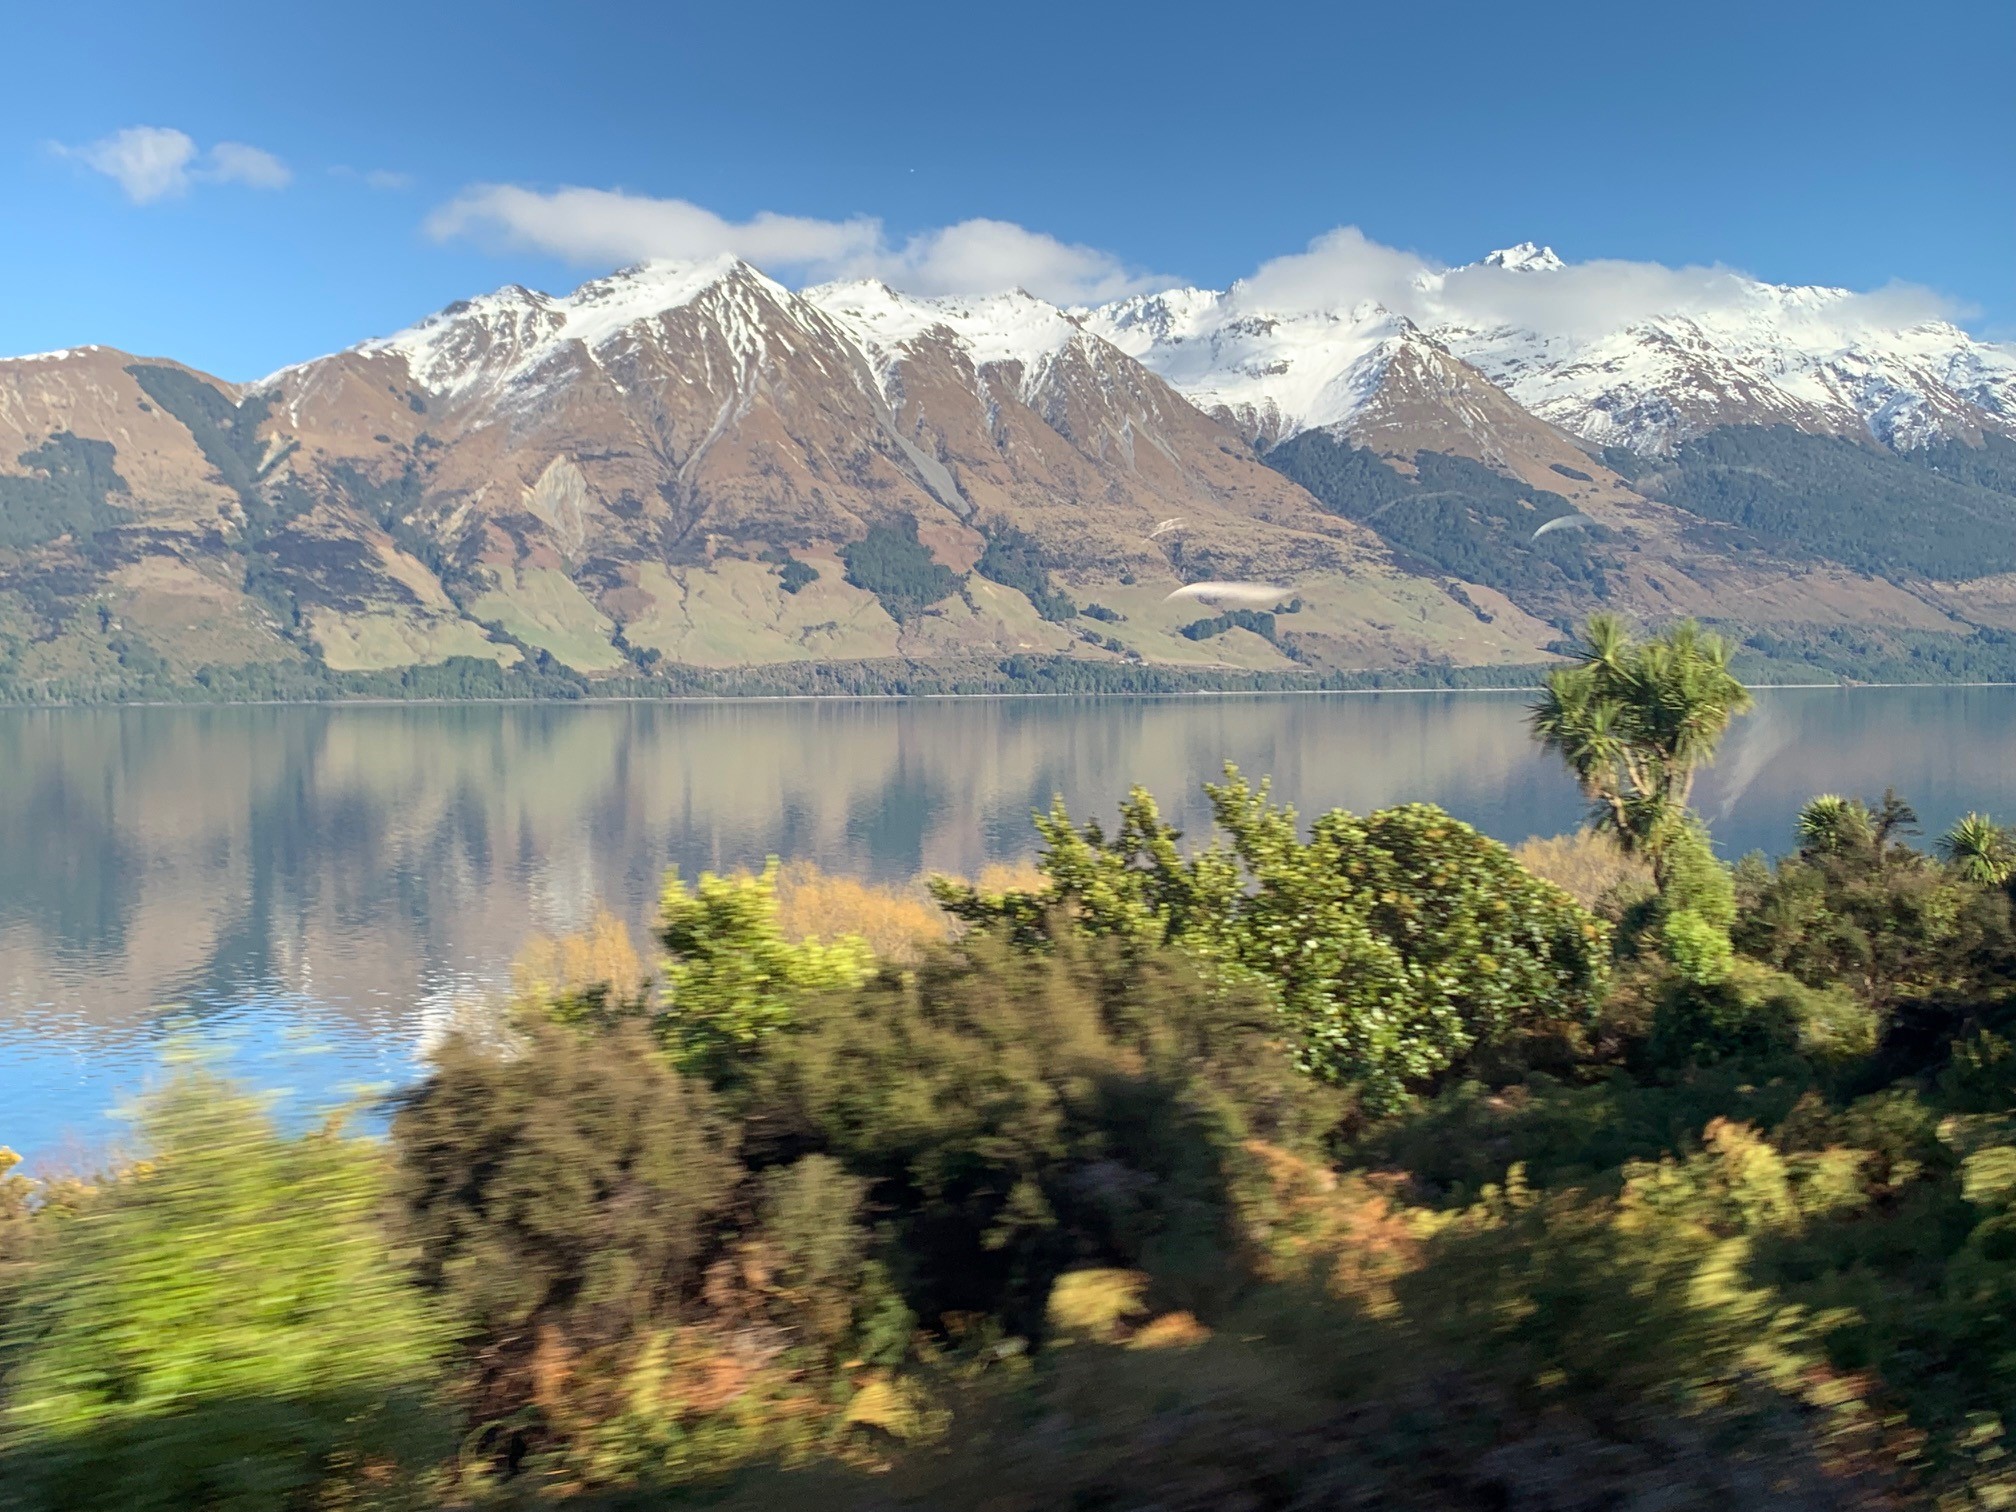 The New Zealand painting trip offered an incredible buffet of scenes